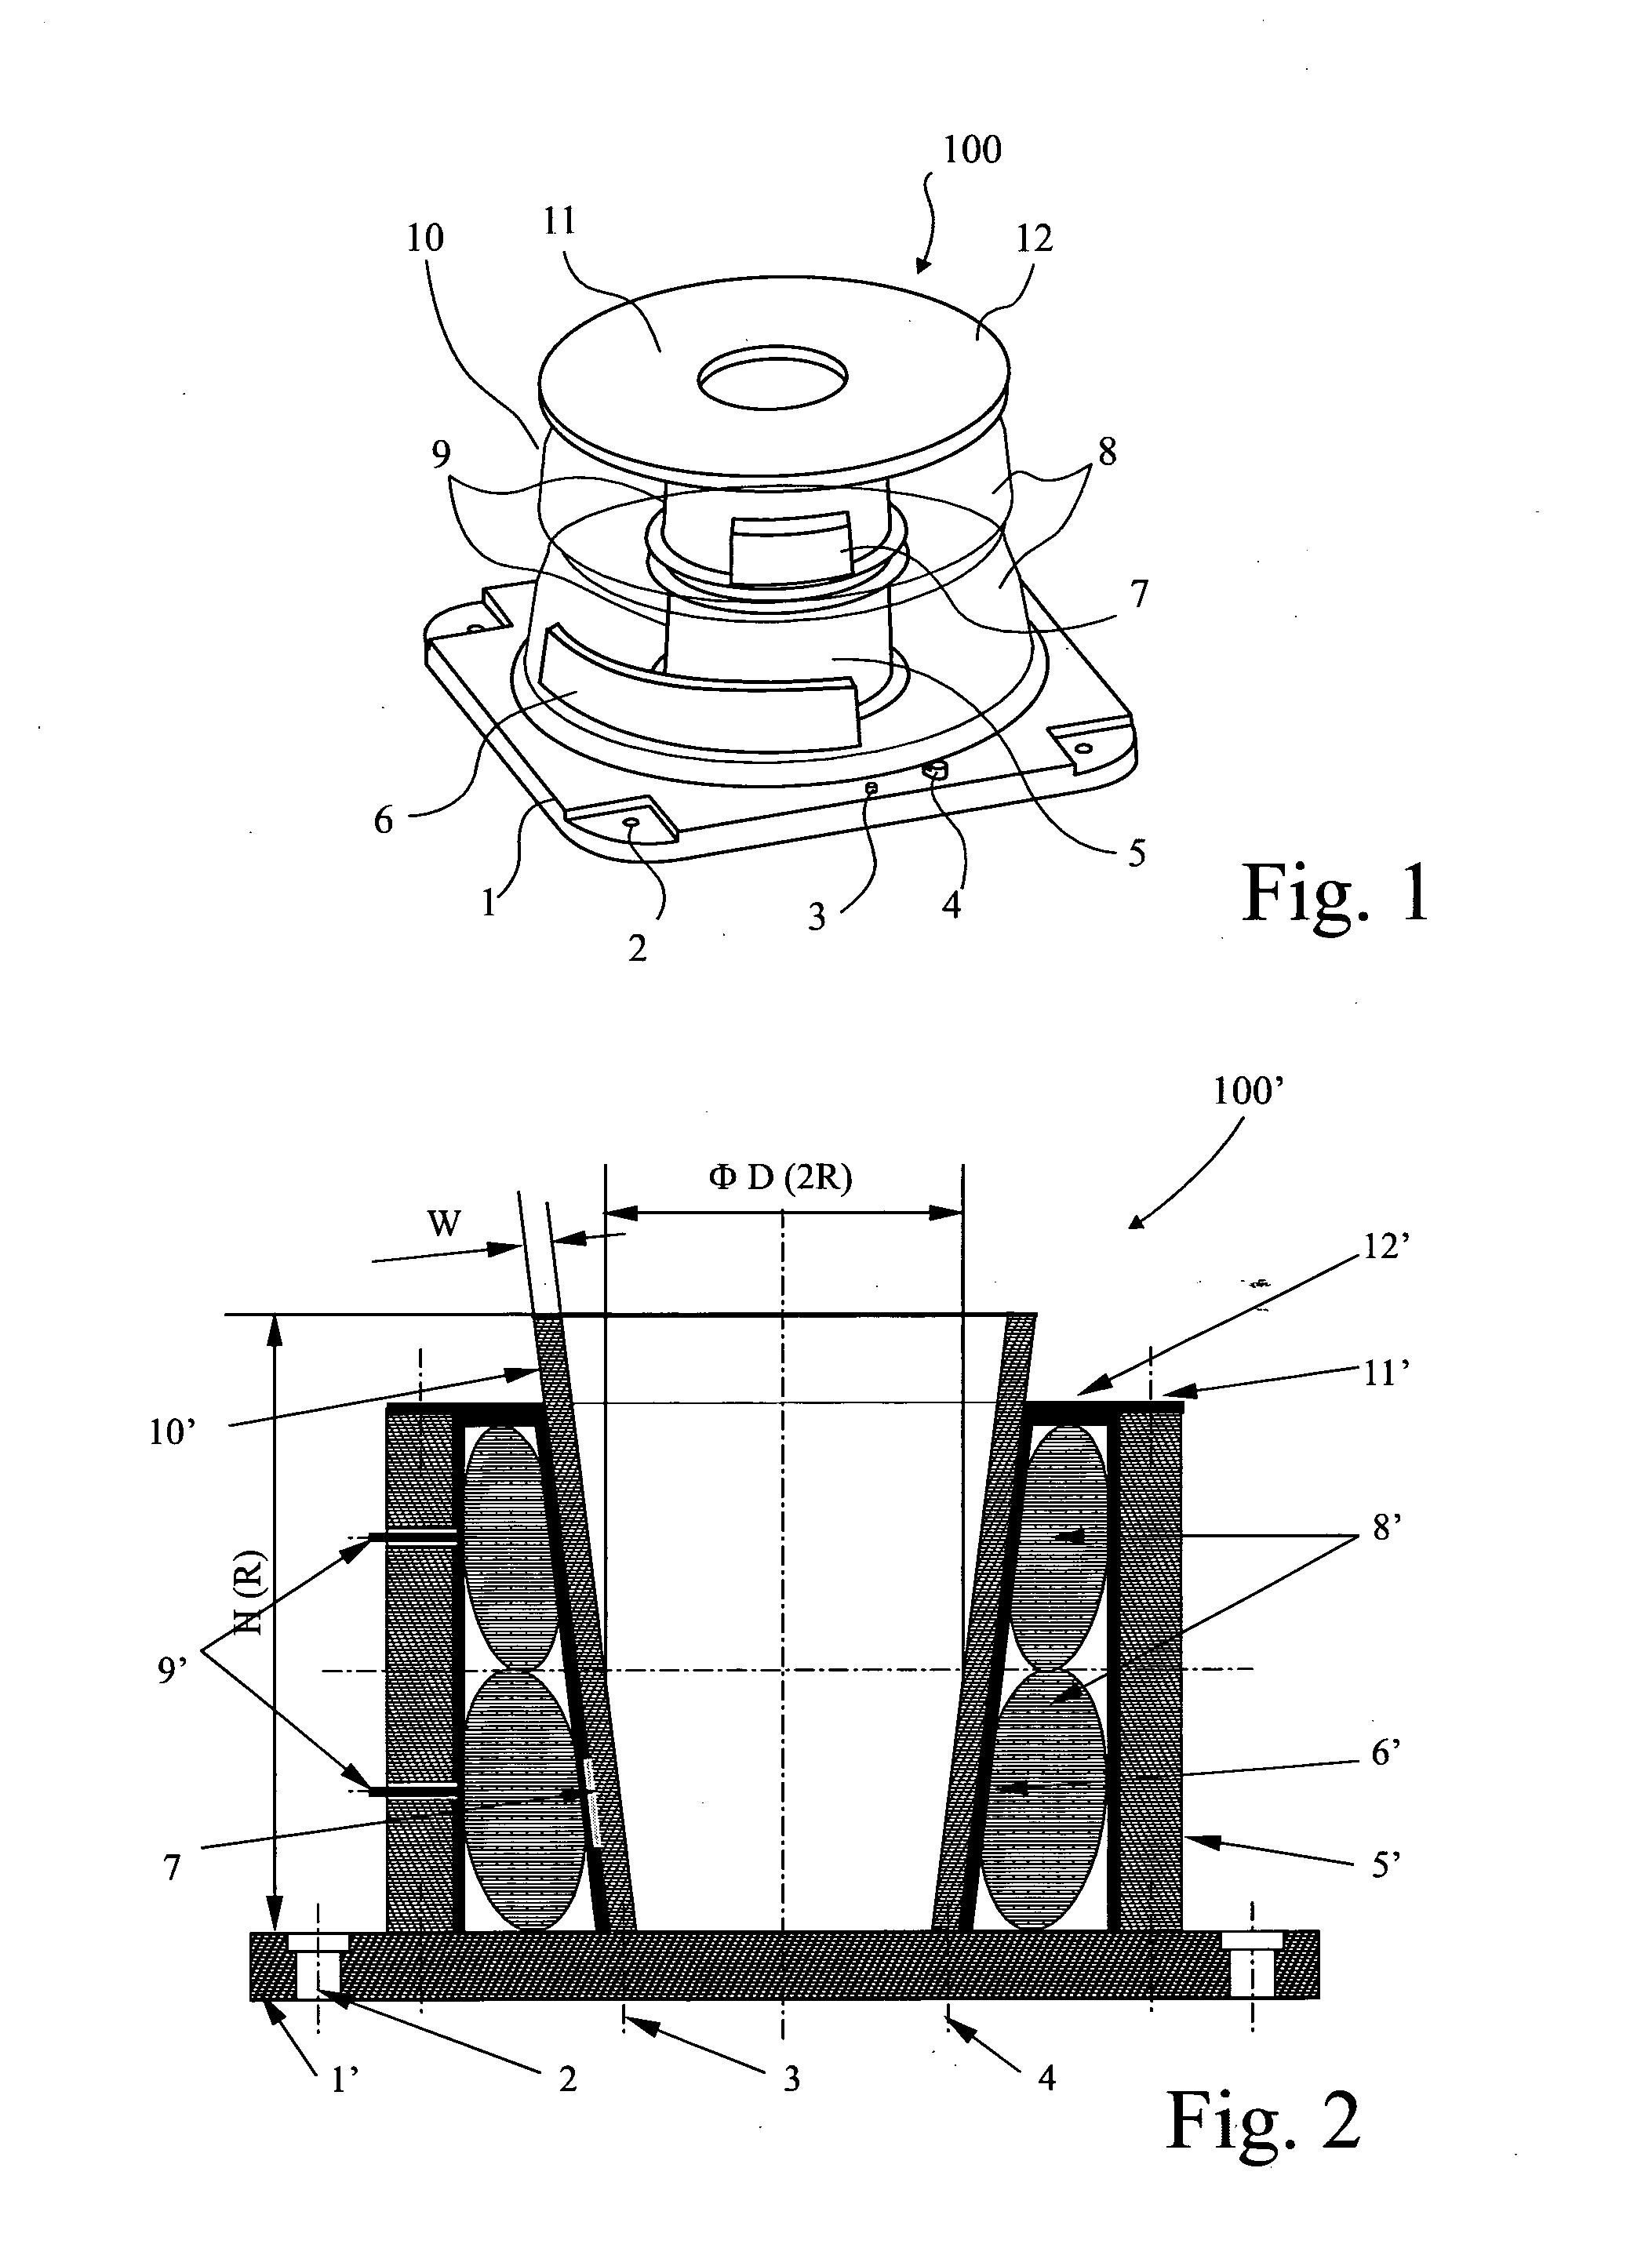 Adaptive design of fixture for thin-walled shell/cylindrical components